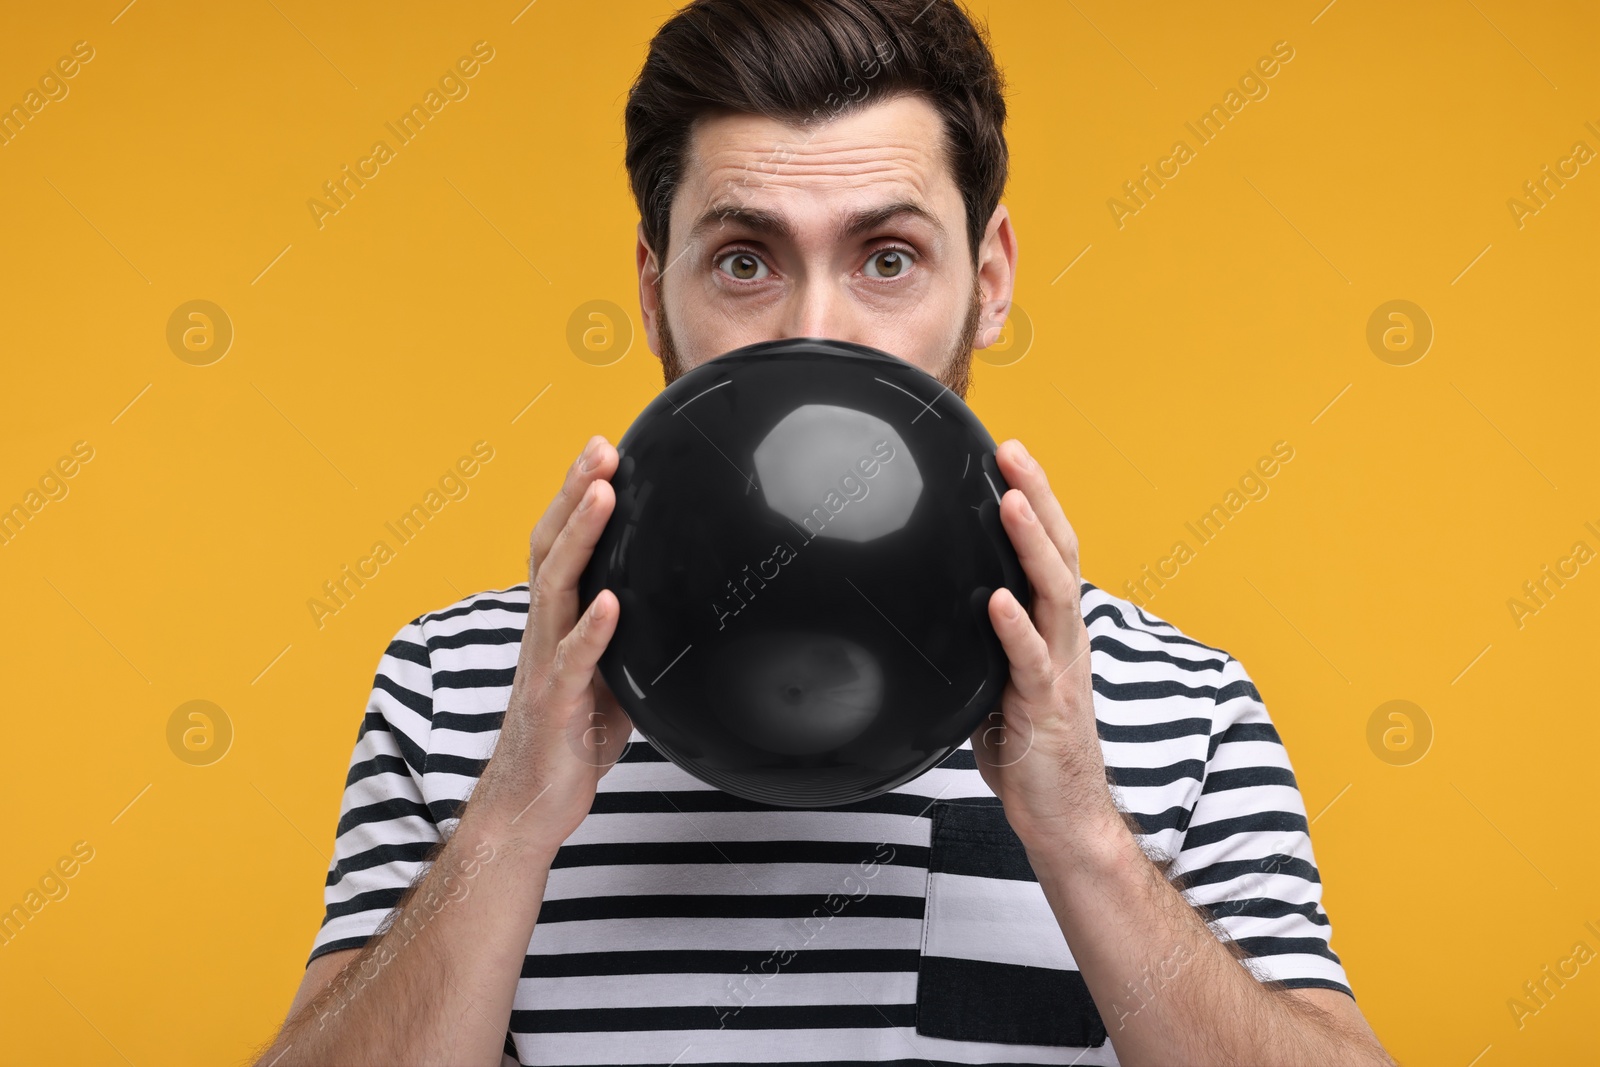 Photo of Man inflating black balloon on yellow background